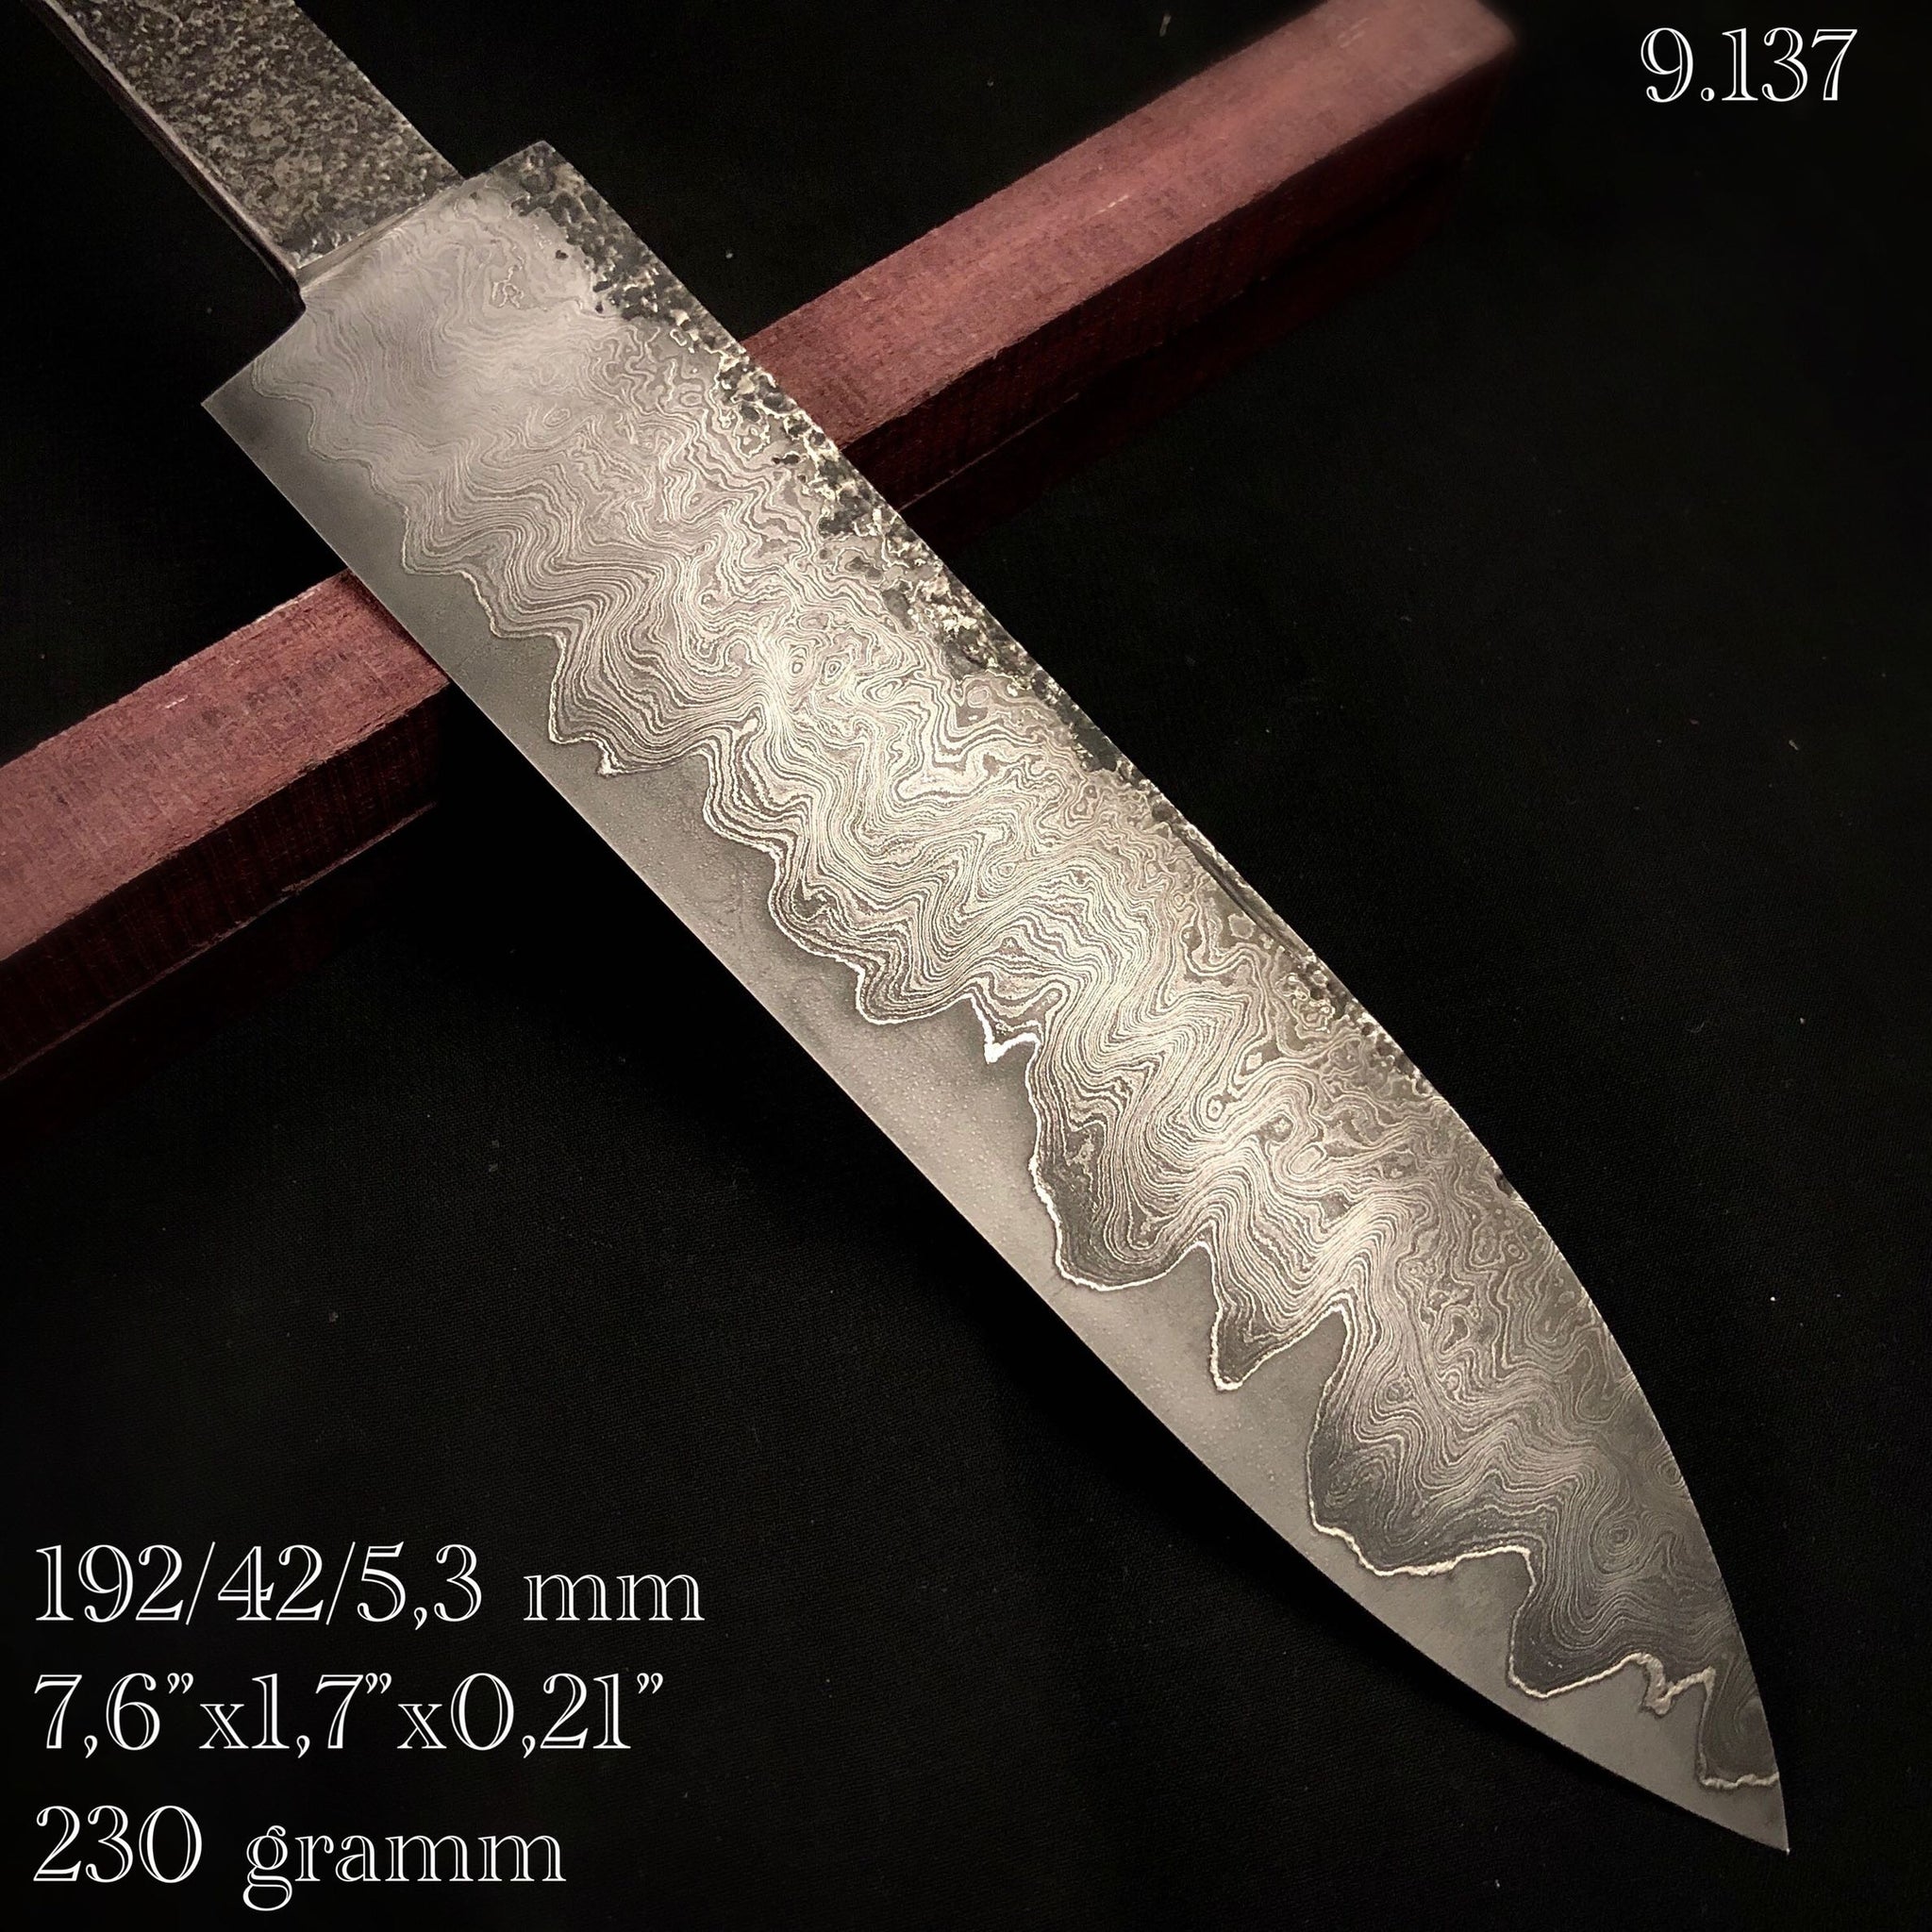 Unique Carbon Steel Blade Blank for Knife Making, Crafting, Hobby.